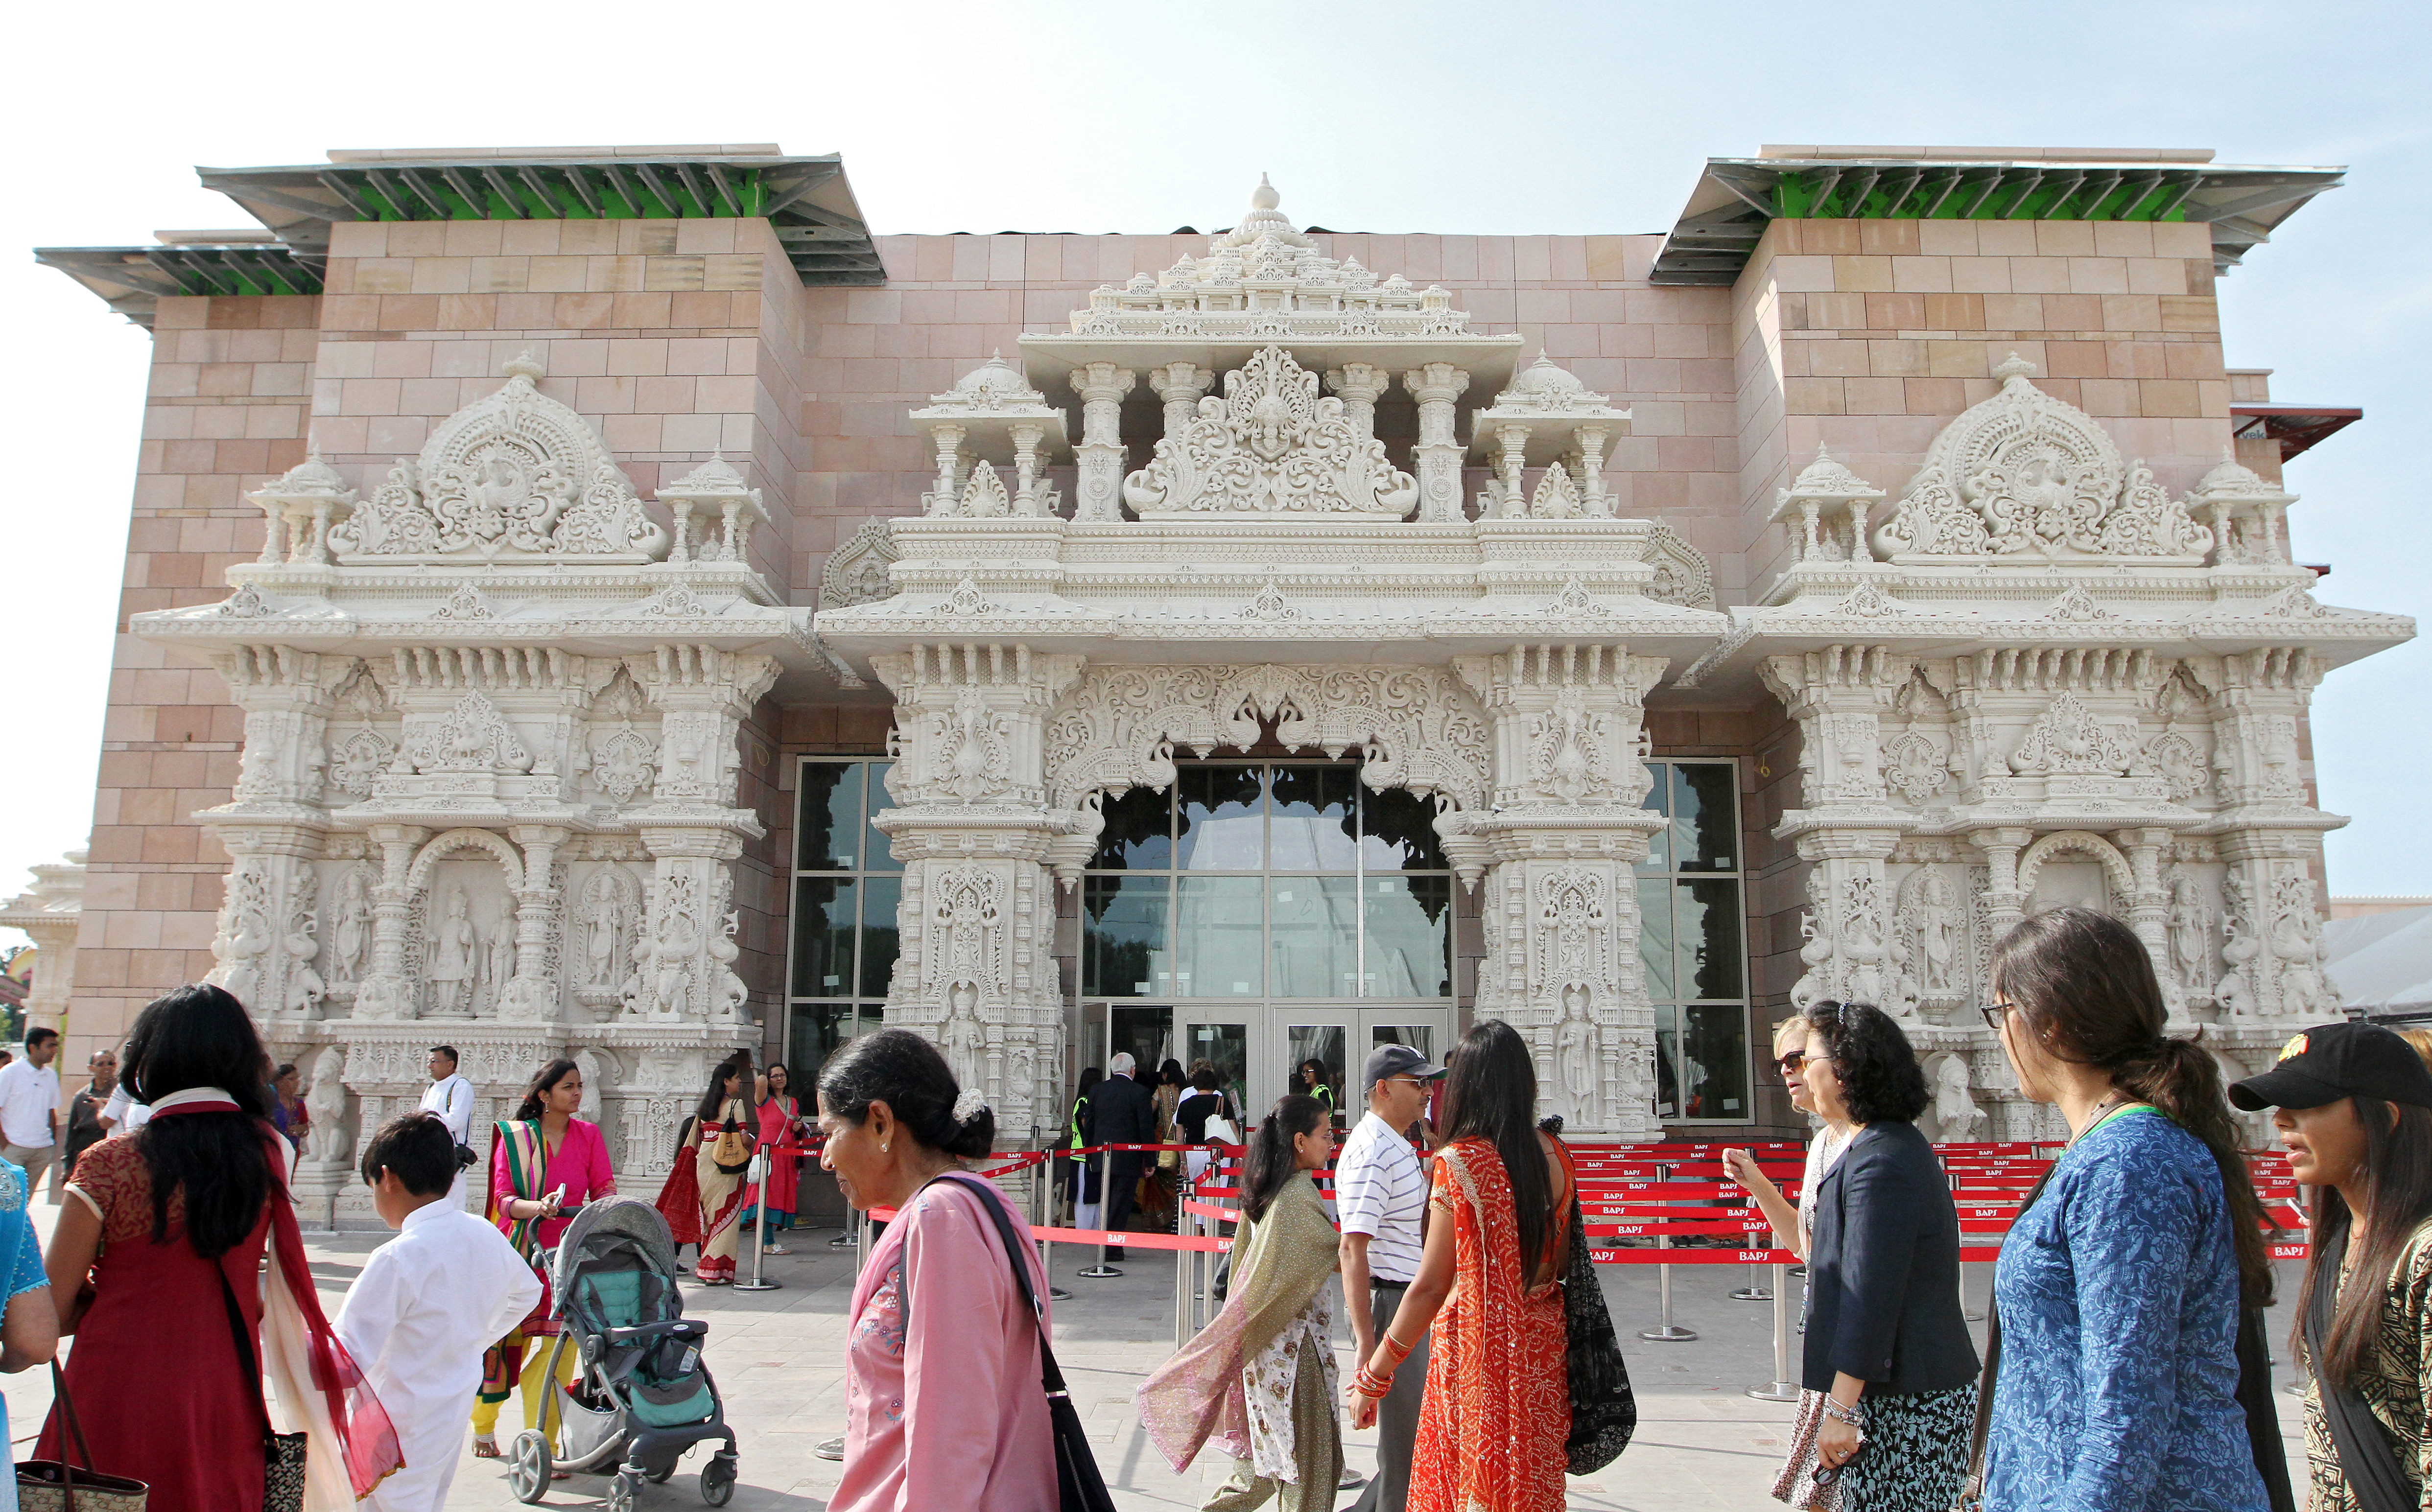 Visitors walk outside the new BAPS Shri Swaminarayan Mandir temple in Robbinsville. The exterior is decorated with images of deities made from limestone. The temple officially open Saturday, August 16, 2014.